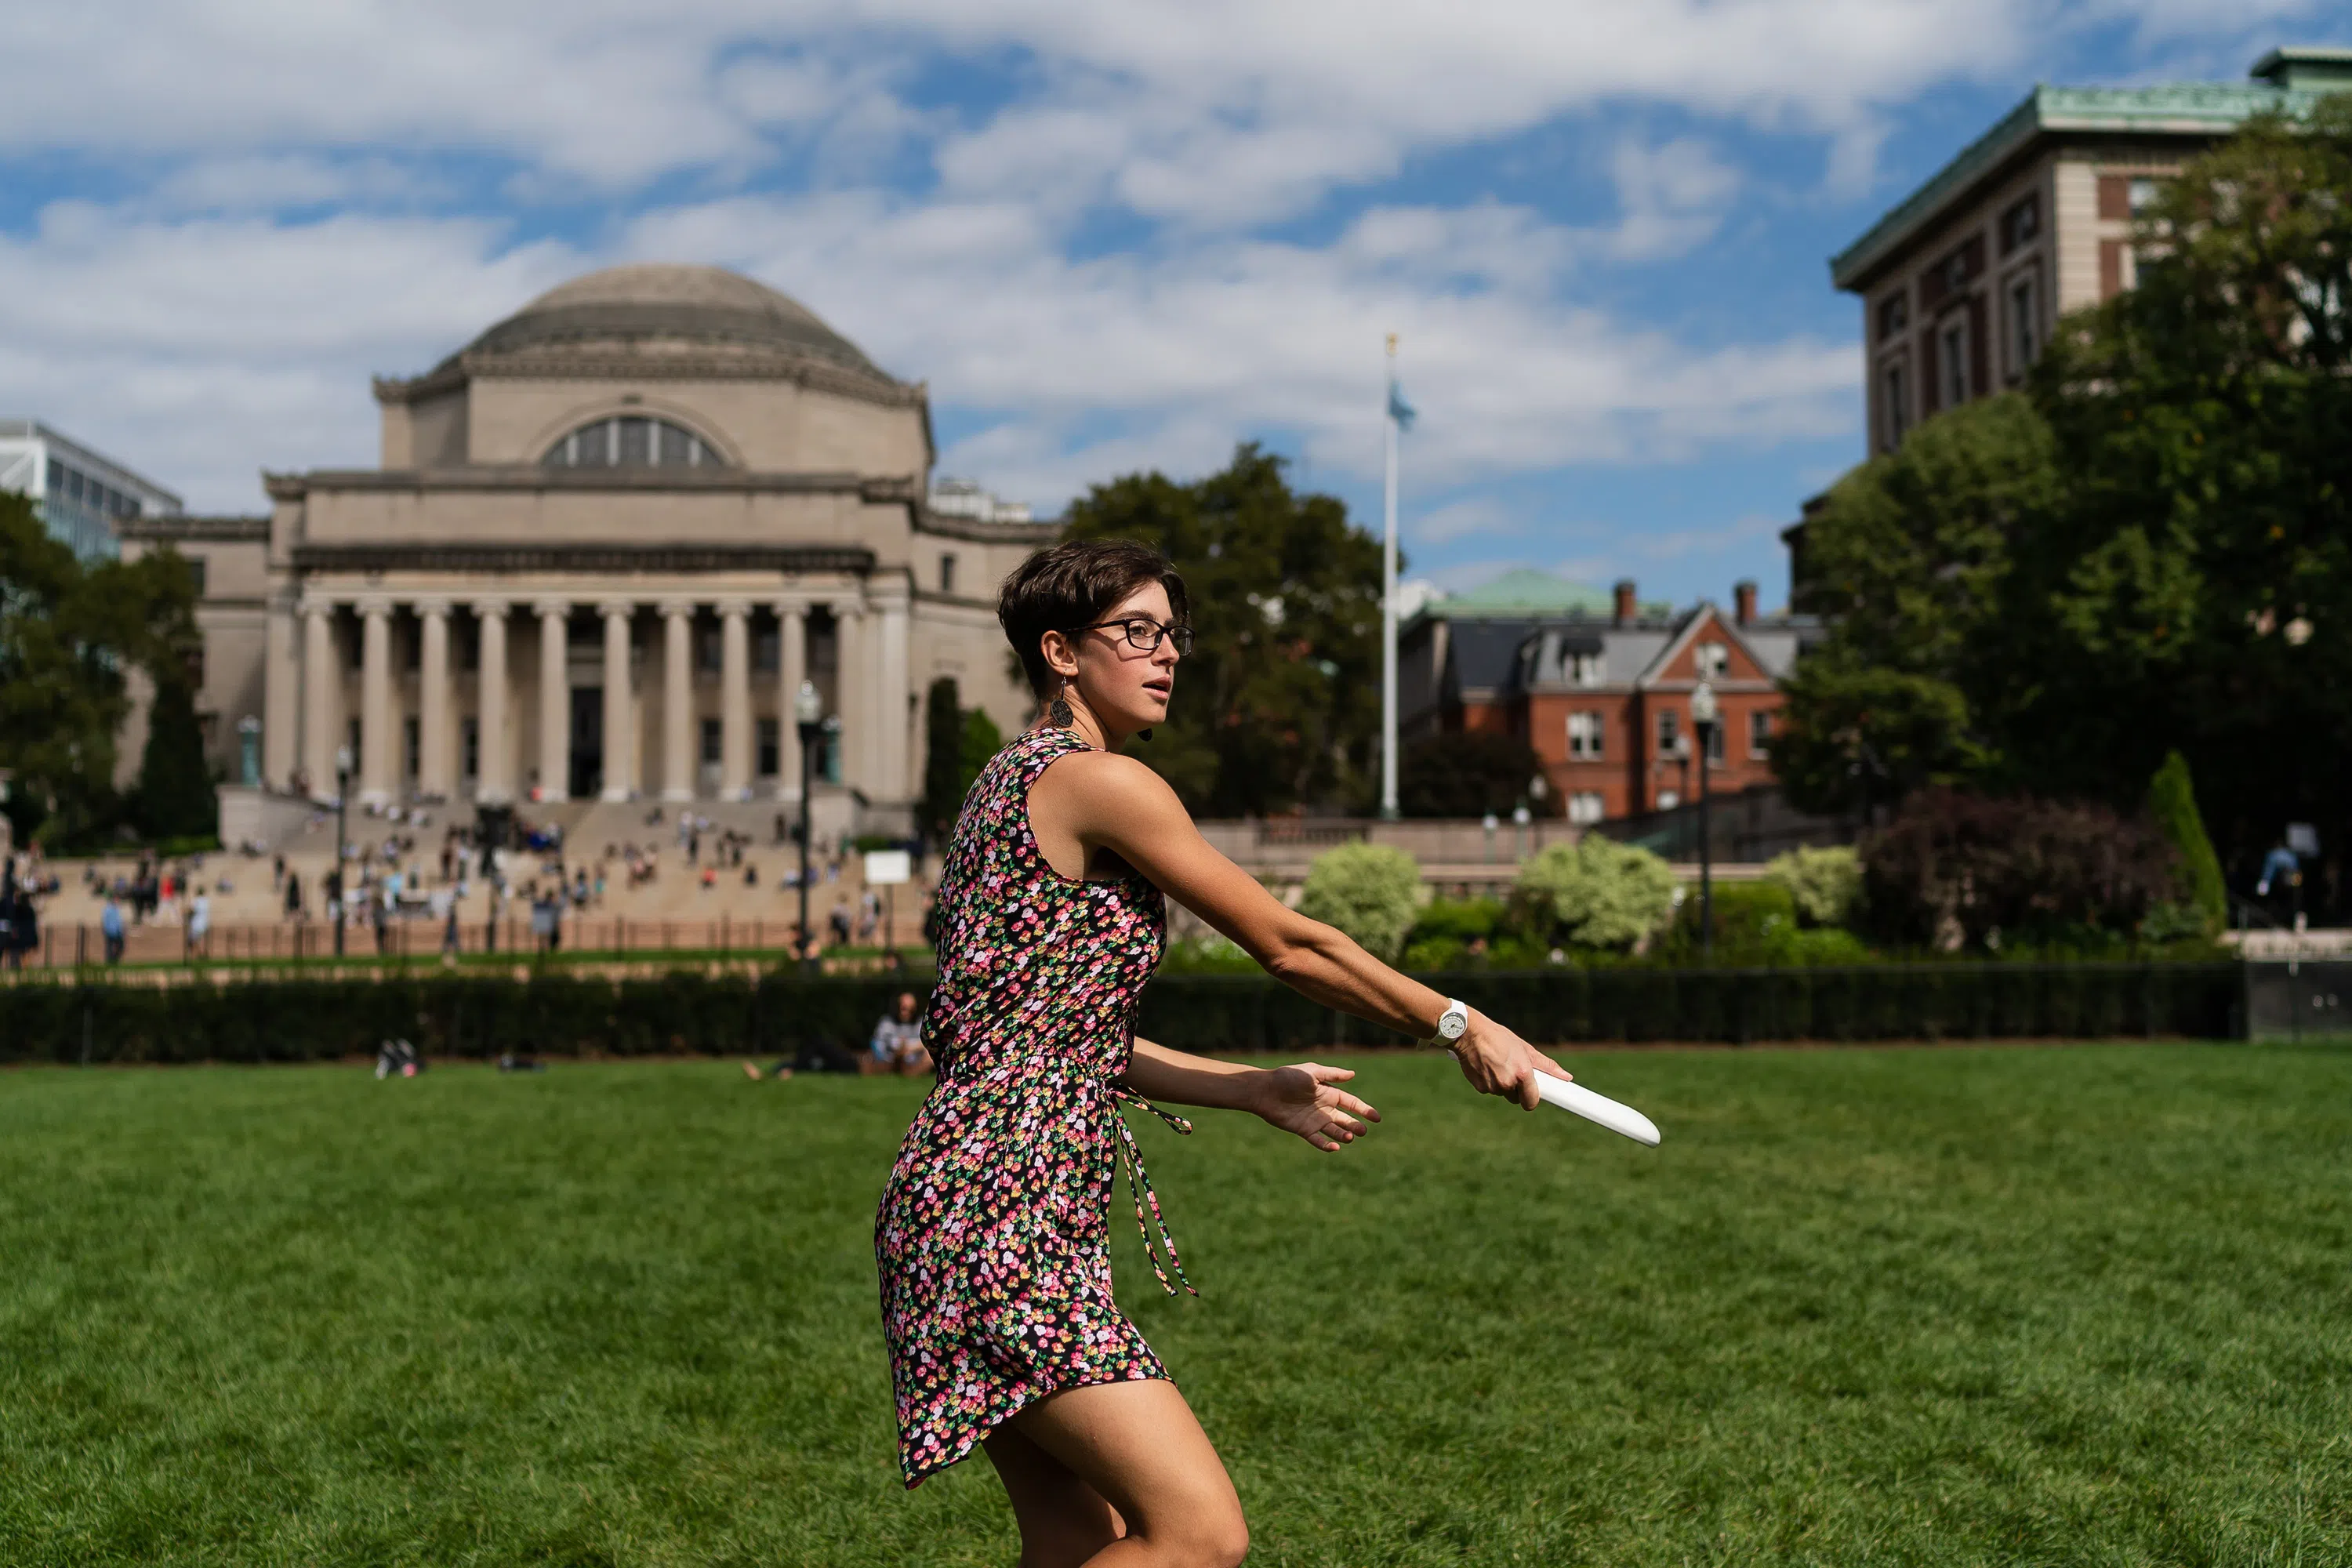 A student stands on a green lawn and throws a frisbee to a friend in the distance.